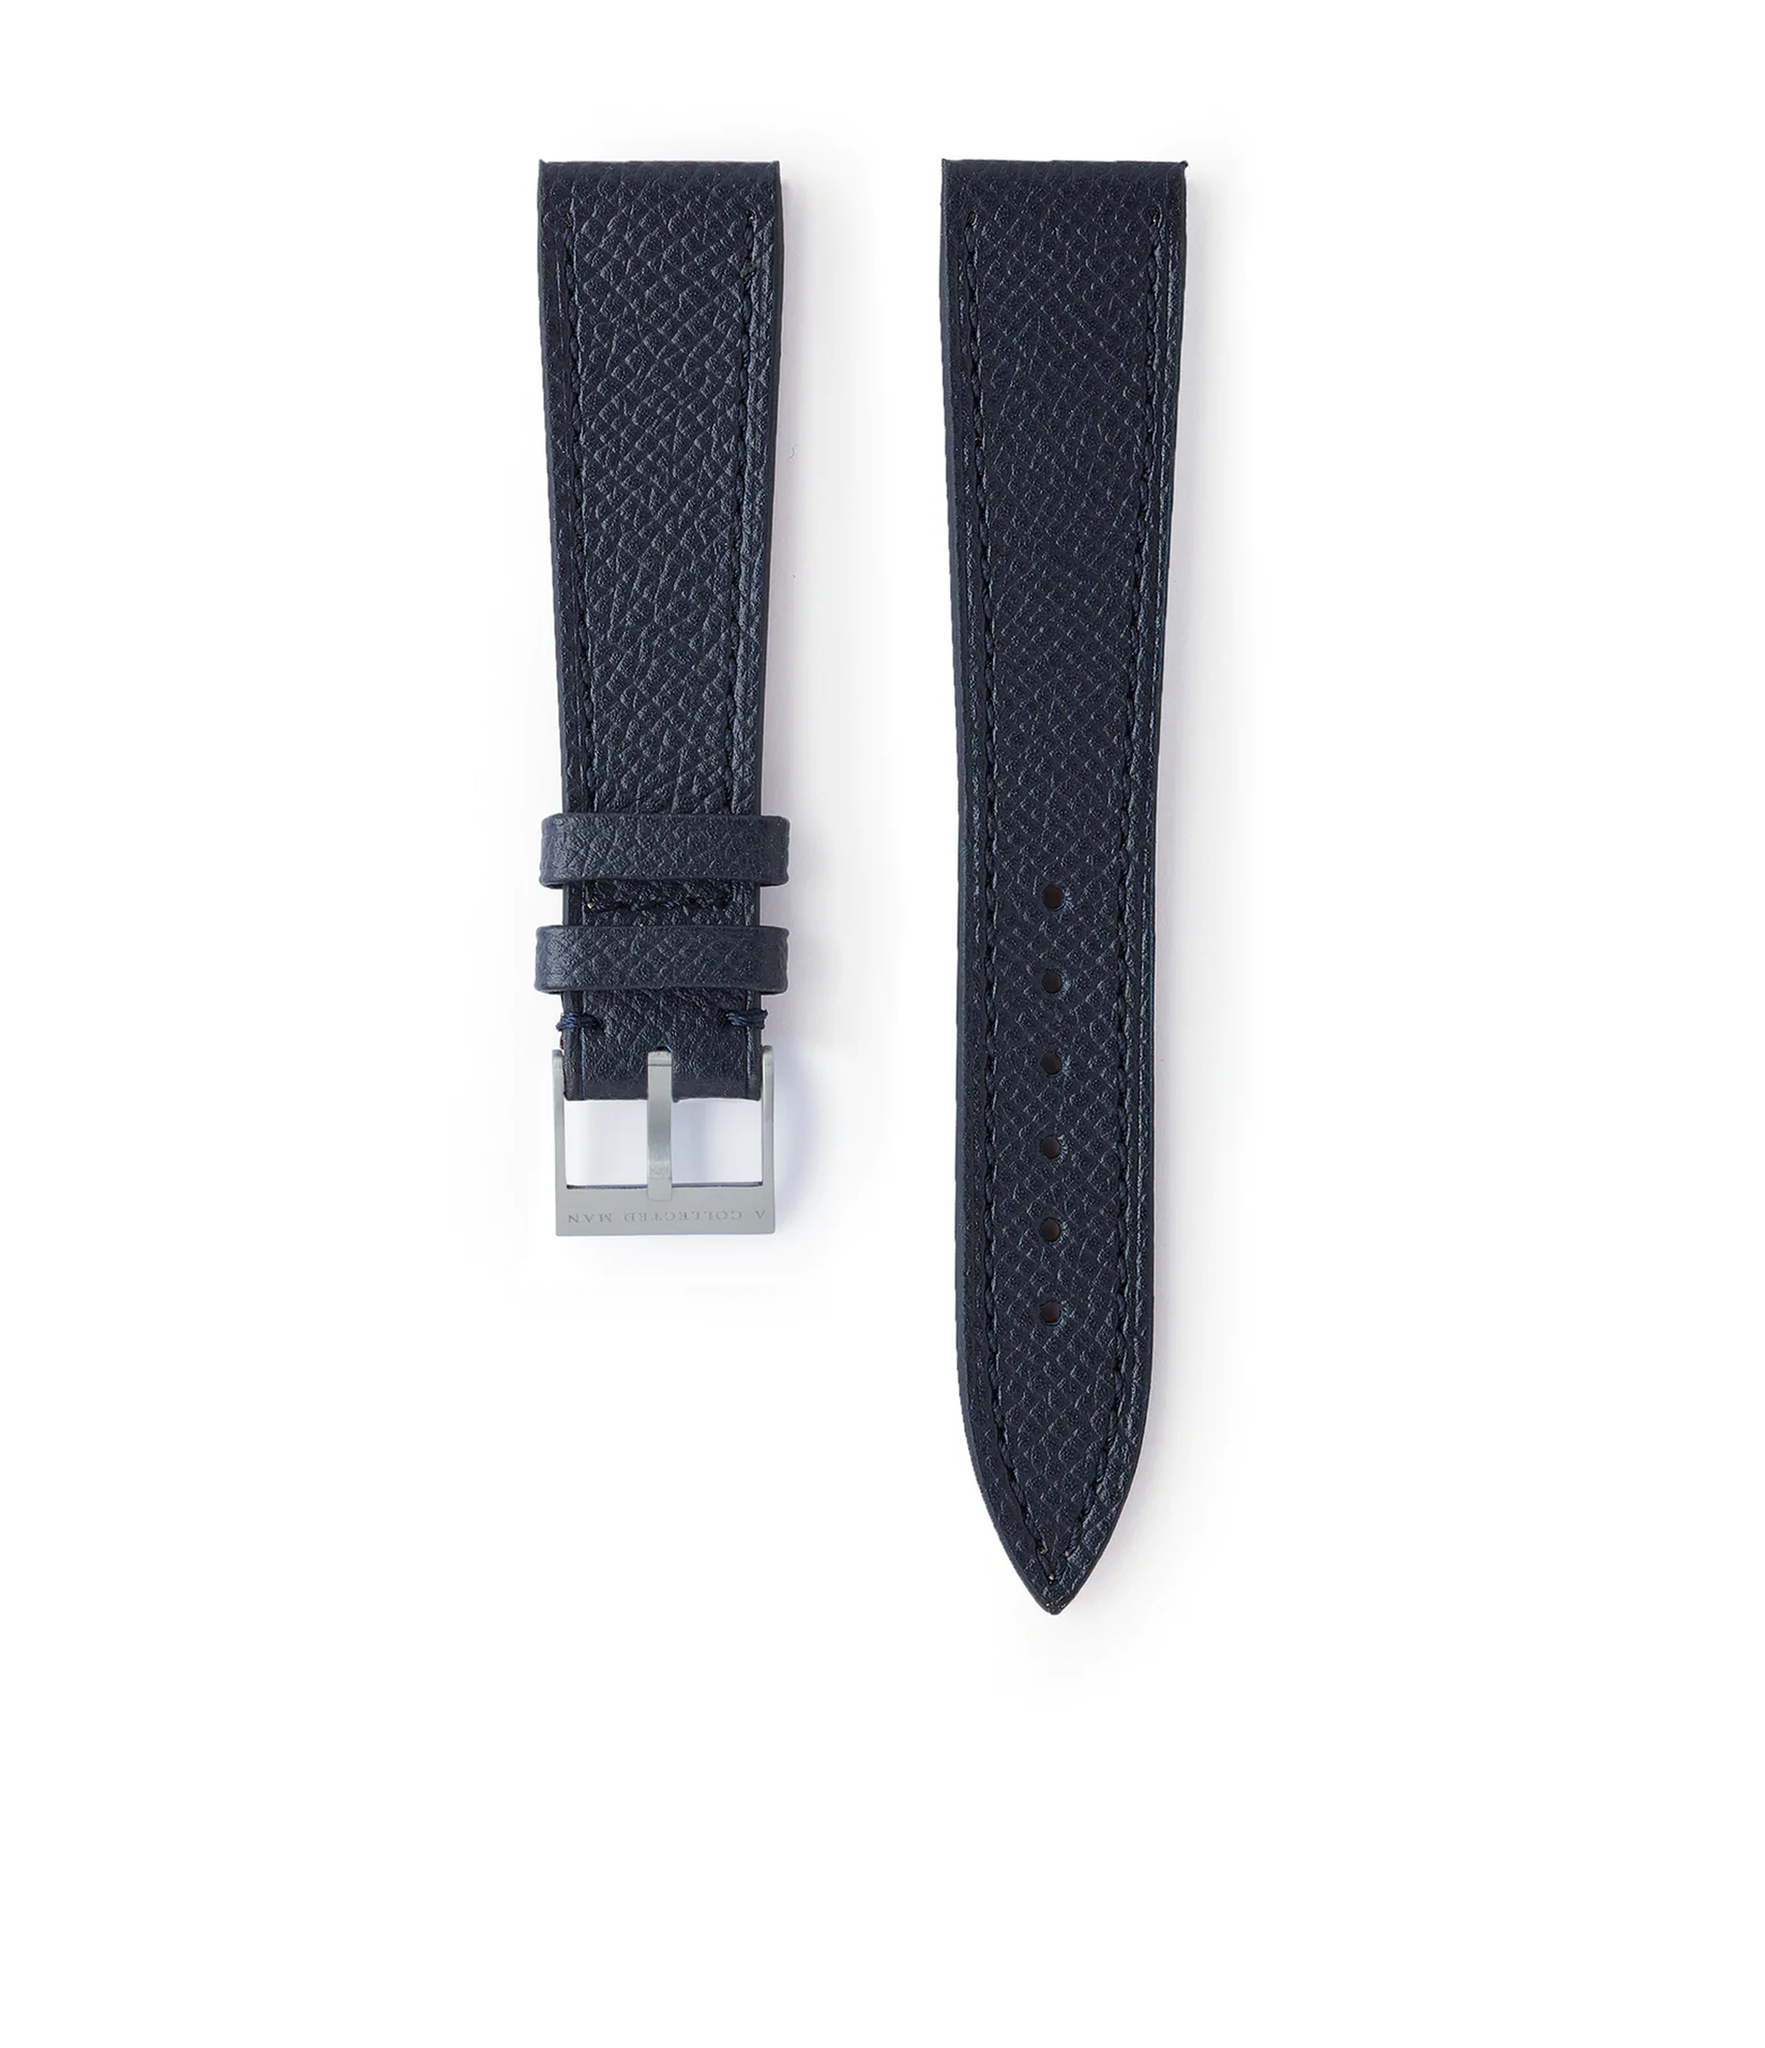  Buy grained leather quality watch strap in midnight sky blue from A Collected Man London, in short or regular lengths. We are proud to offer these hand-crafted watch straps, thoughtfully made in Europe, to suit your watch. Available to order online for worldwide delivery.